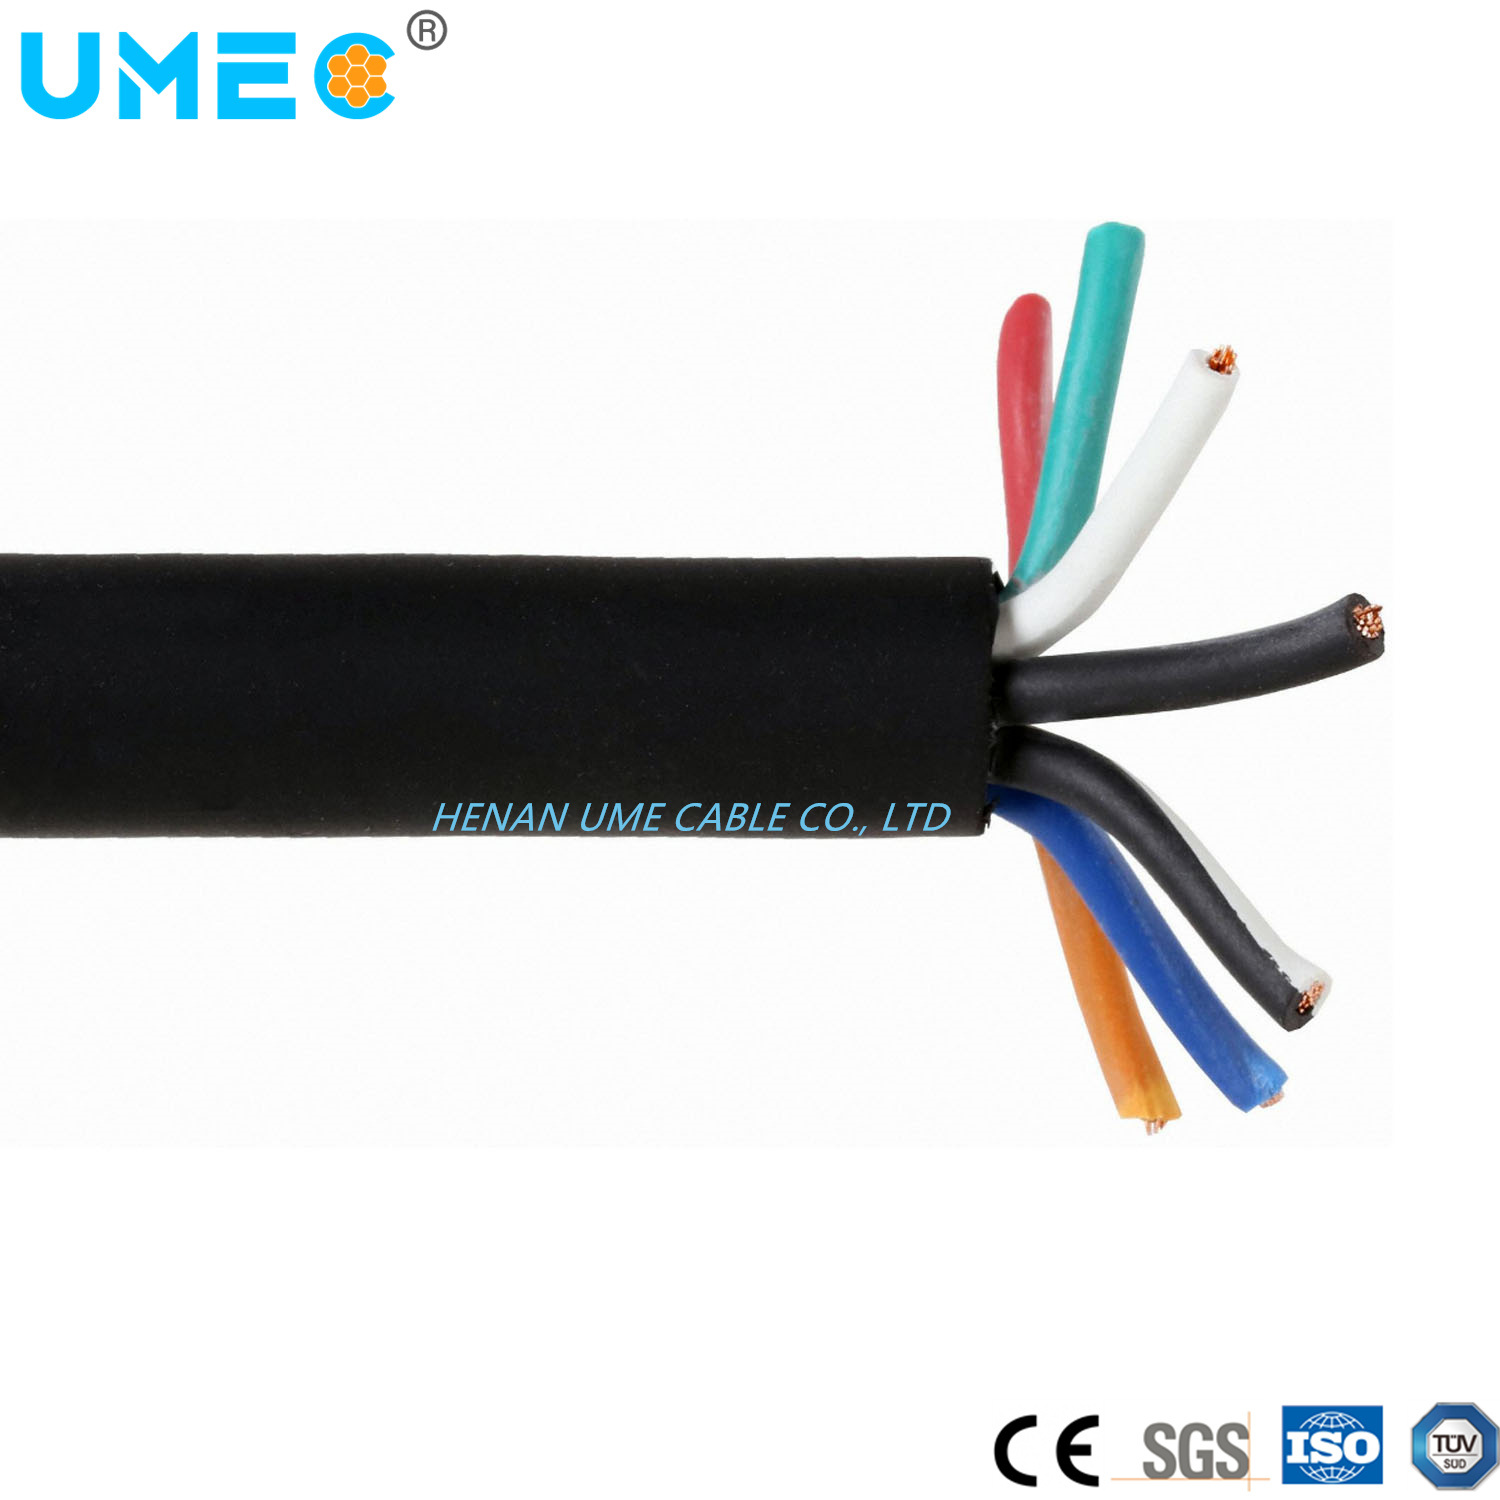 ASTM Standard 2 3 4 5 Copper Conductor 16AWG 12AWG 10AWG 8AWG*4core So Sow Soow Sjoow Flexible Rubber Cable